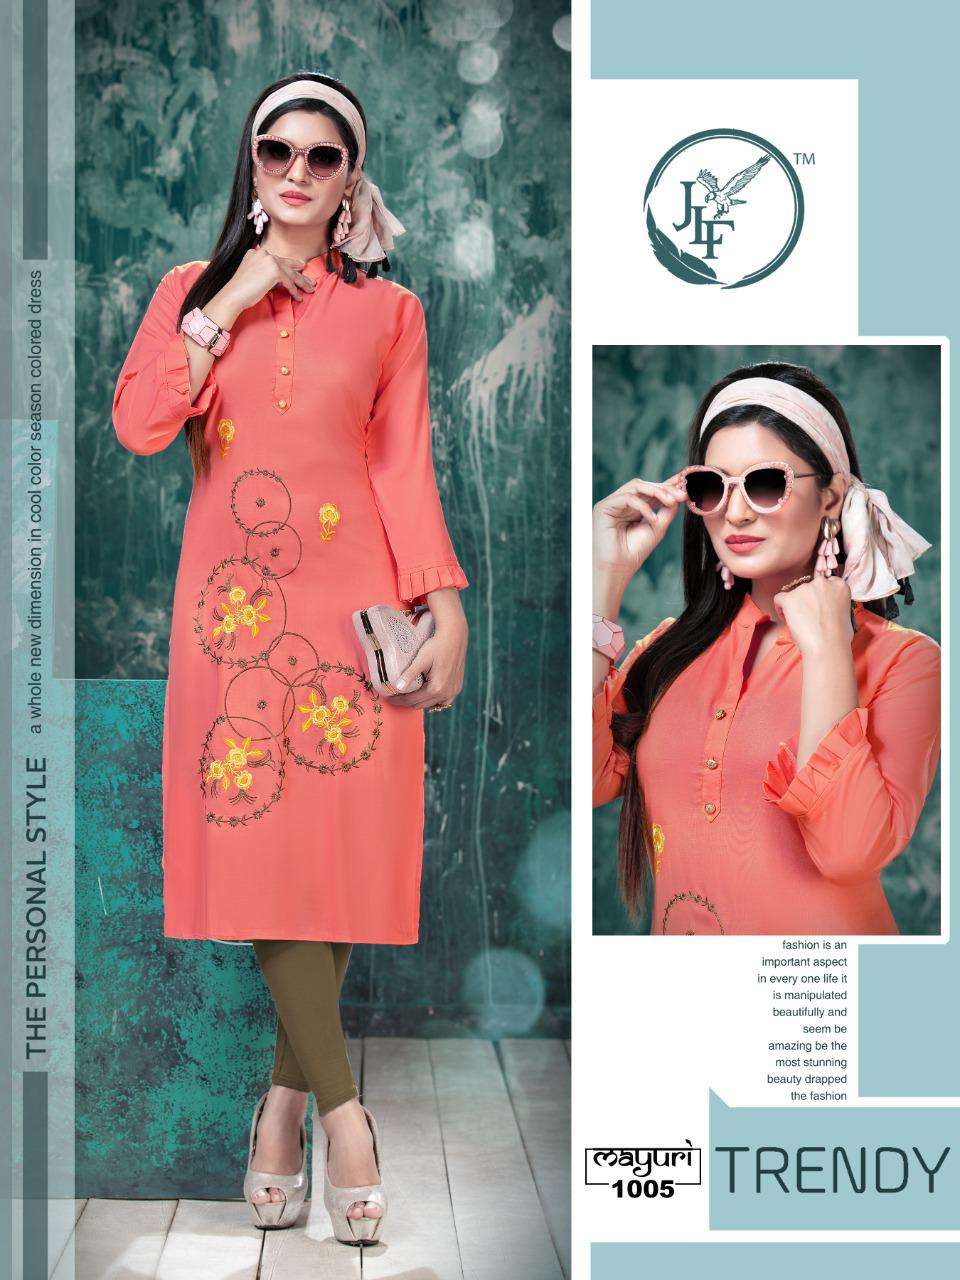 MAYURI BY JLF 1001 TO 1008 SERIES STYLISH FANCY BEAUTIFUL COLORFUL CASUAL WEAR & ETHNIC WEAR HEAVY RAYON EMBROIDERED KURTIS AT WHOLESALE PRICE